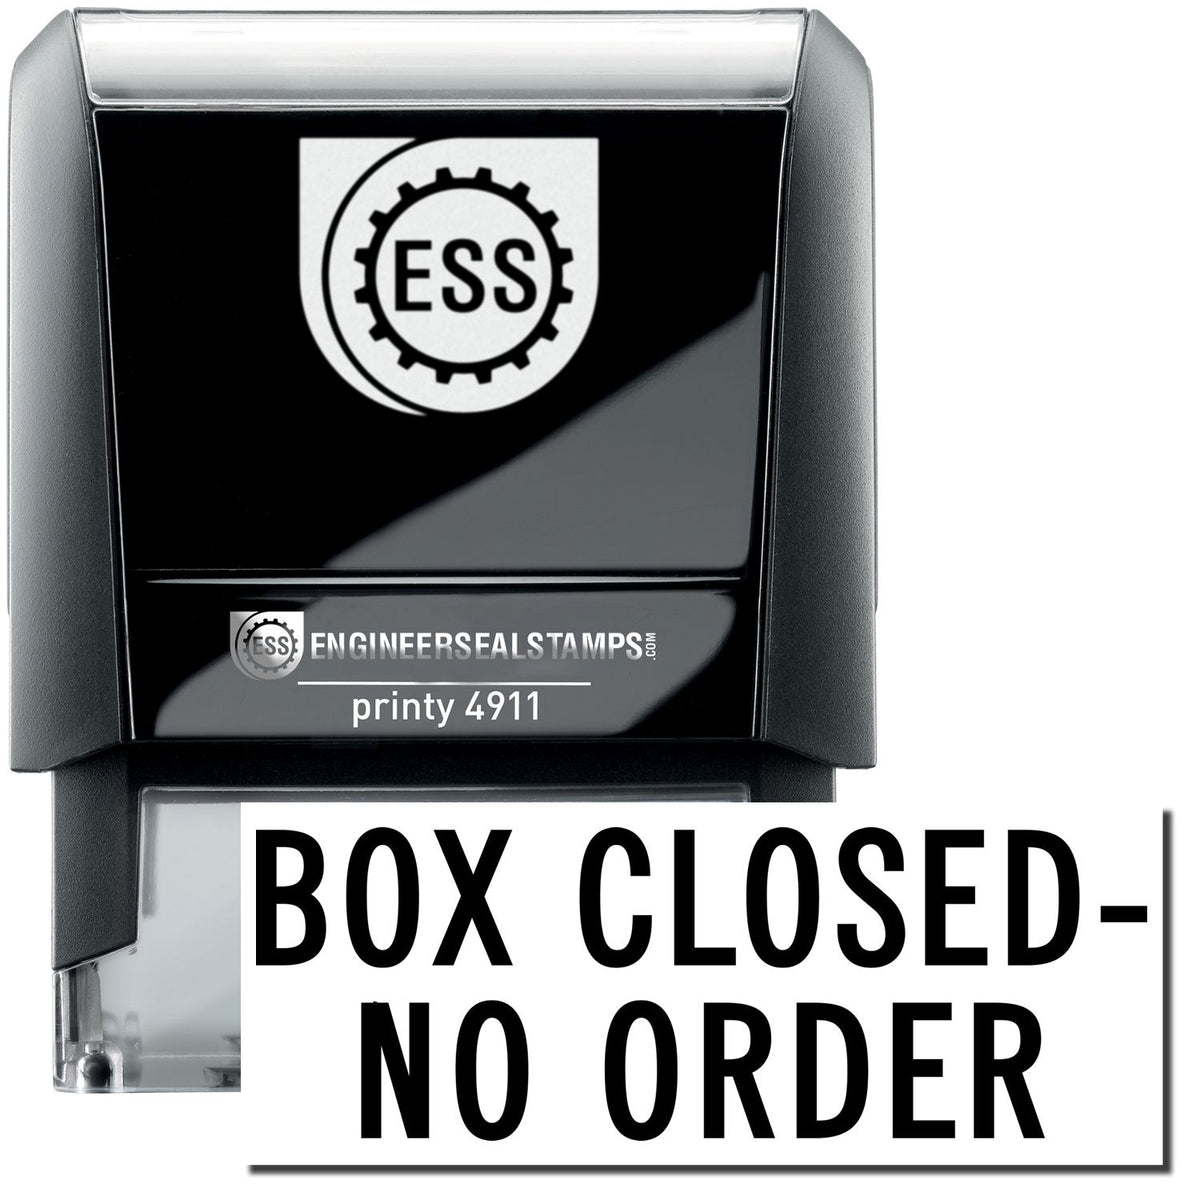 A self-inking stamp with a stamped image showing how the text &quot;BOX CLOSED - NO ORDER&quot; is displayed after stamping.